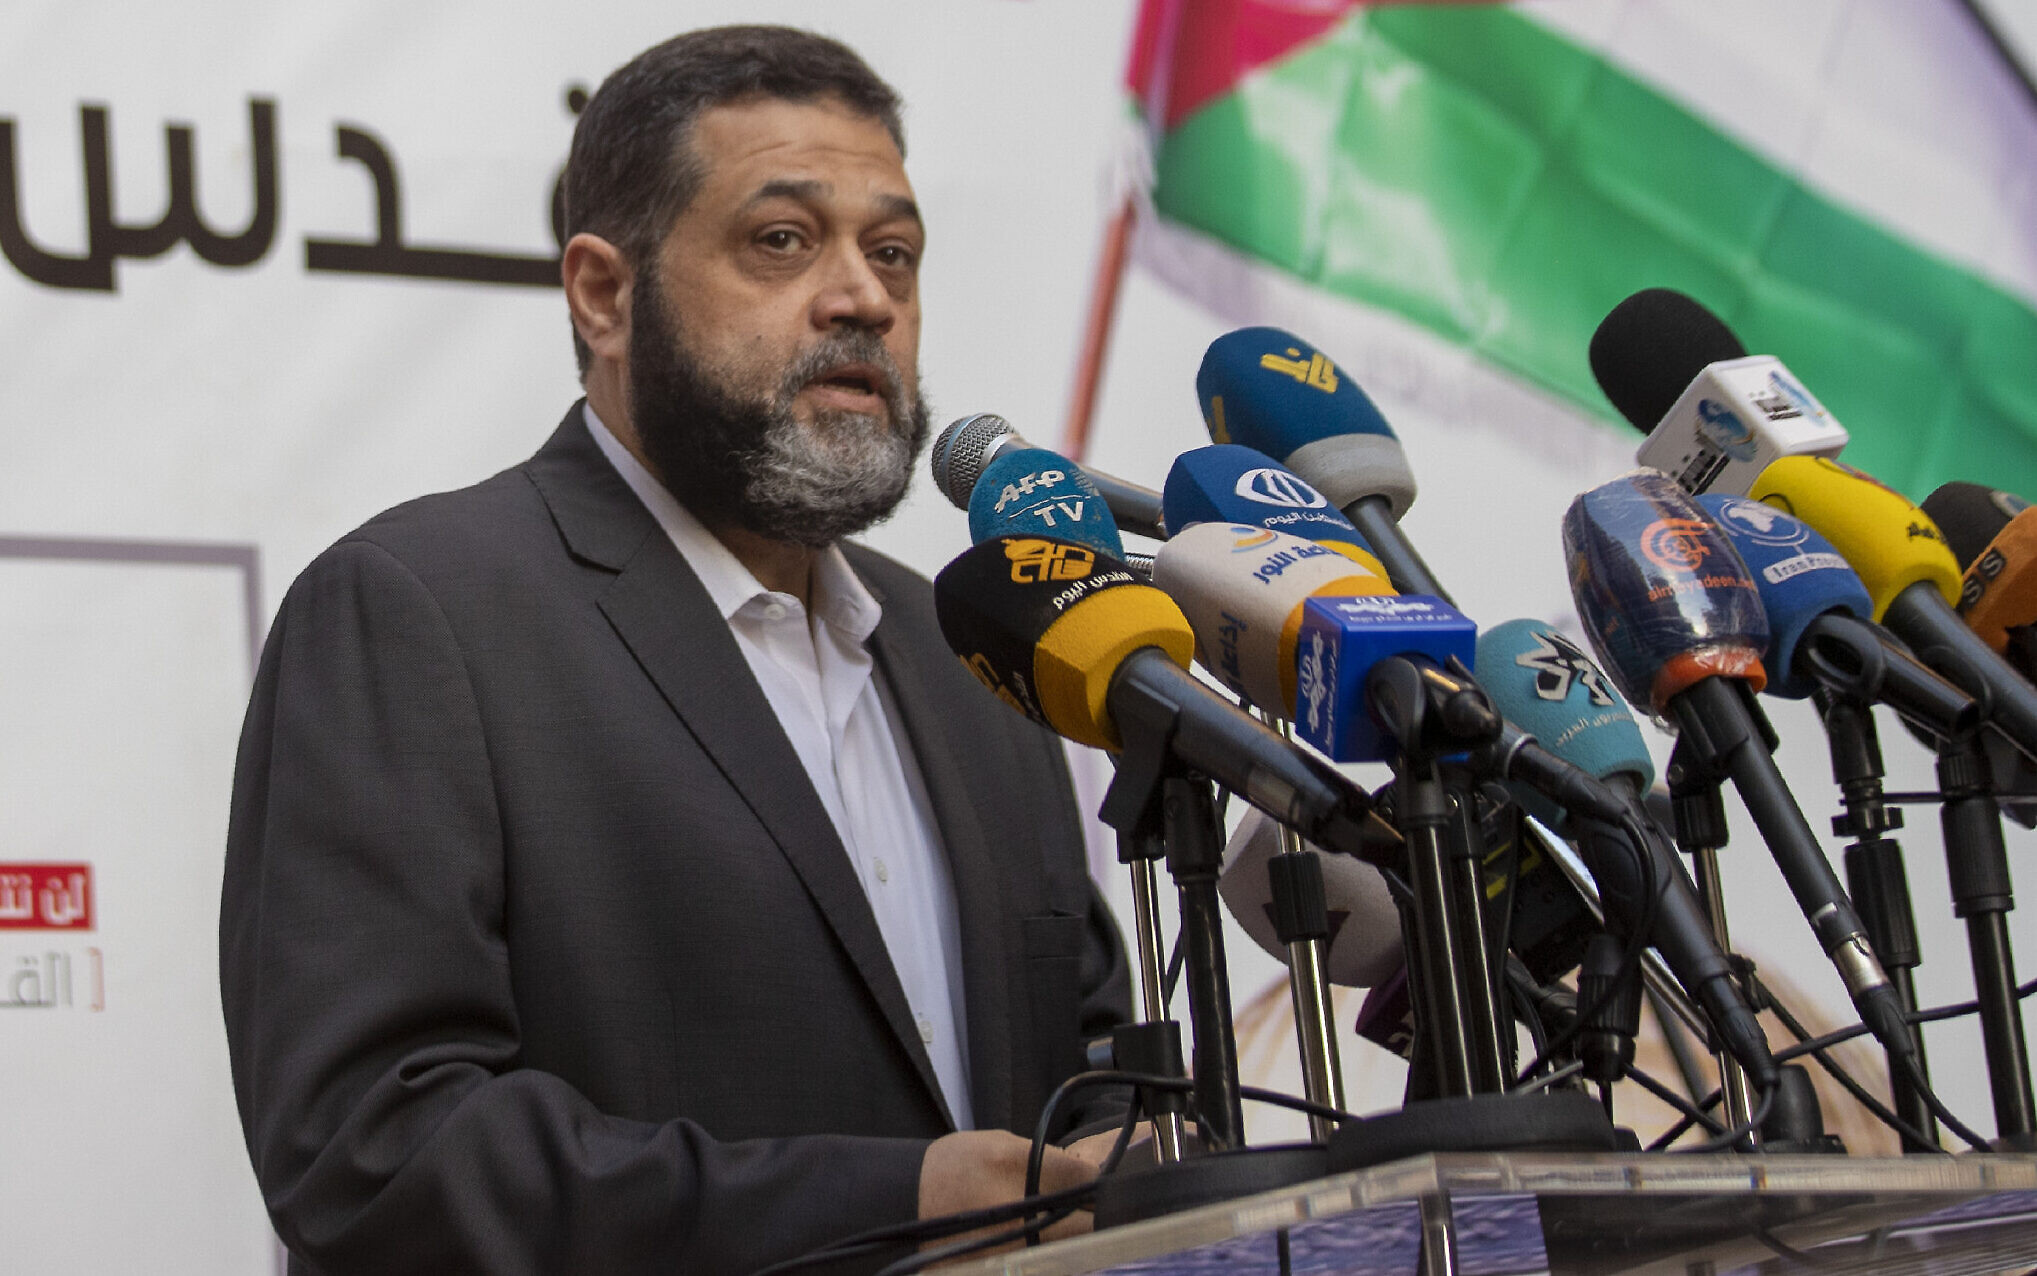 Hamas official expresses opposition to latest hostage deal offer, but  terror group says talks continue | The Times of Israel